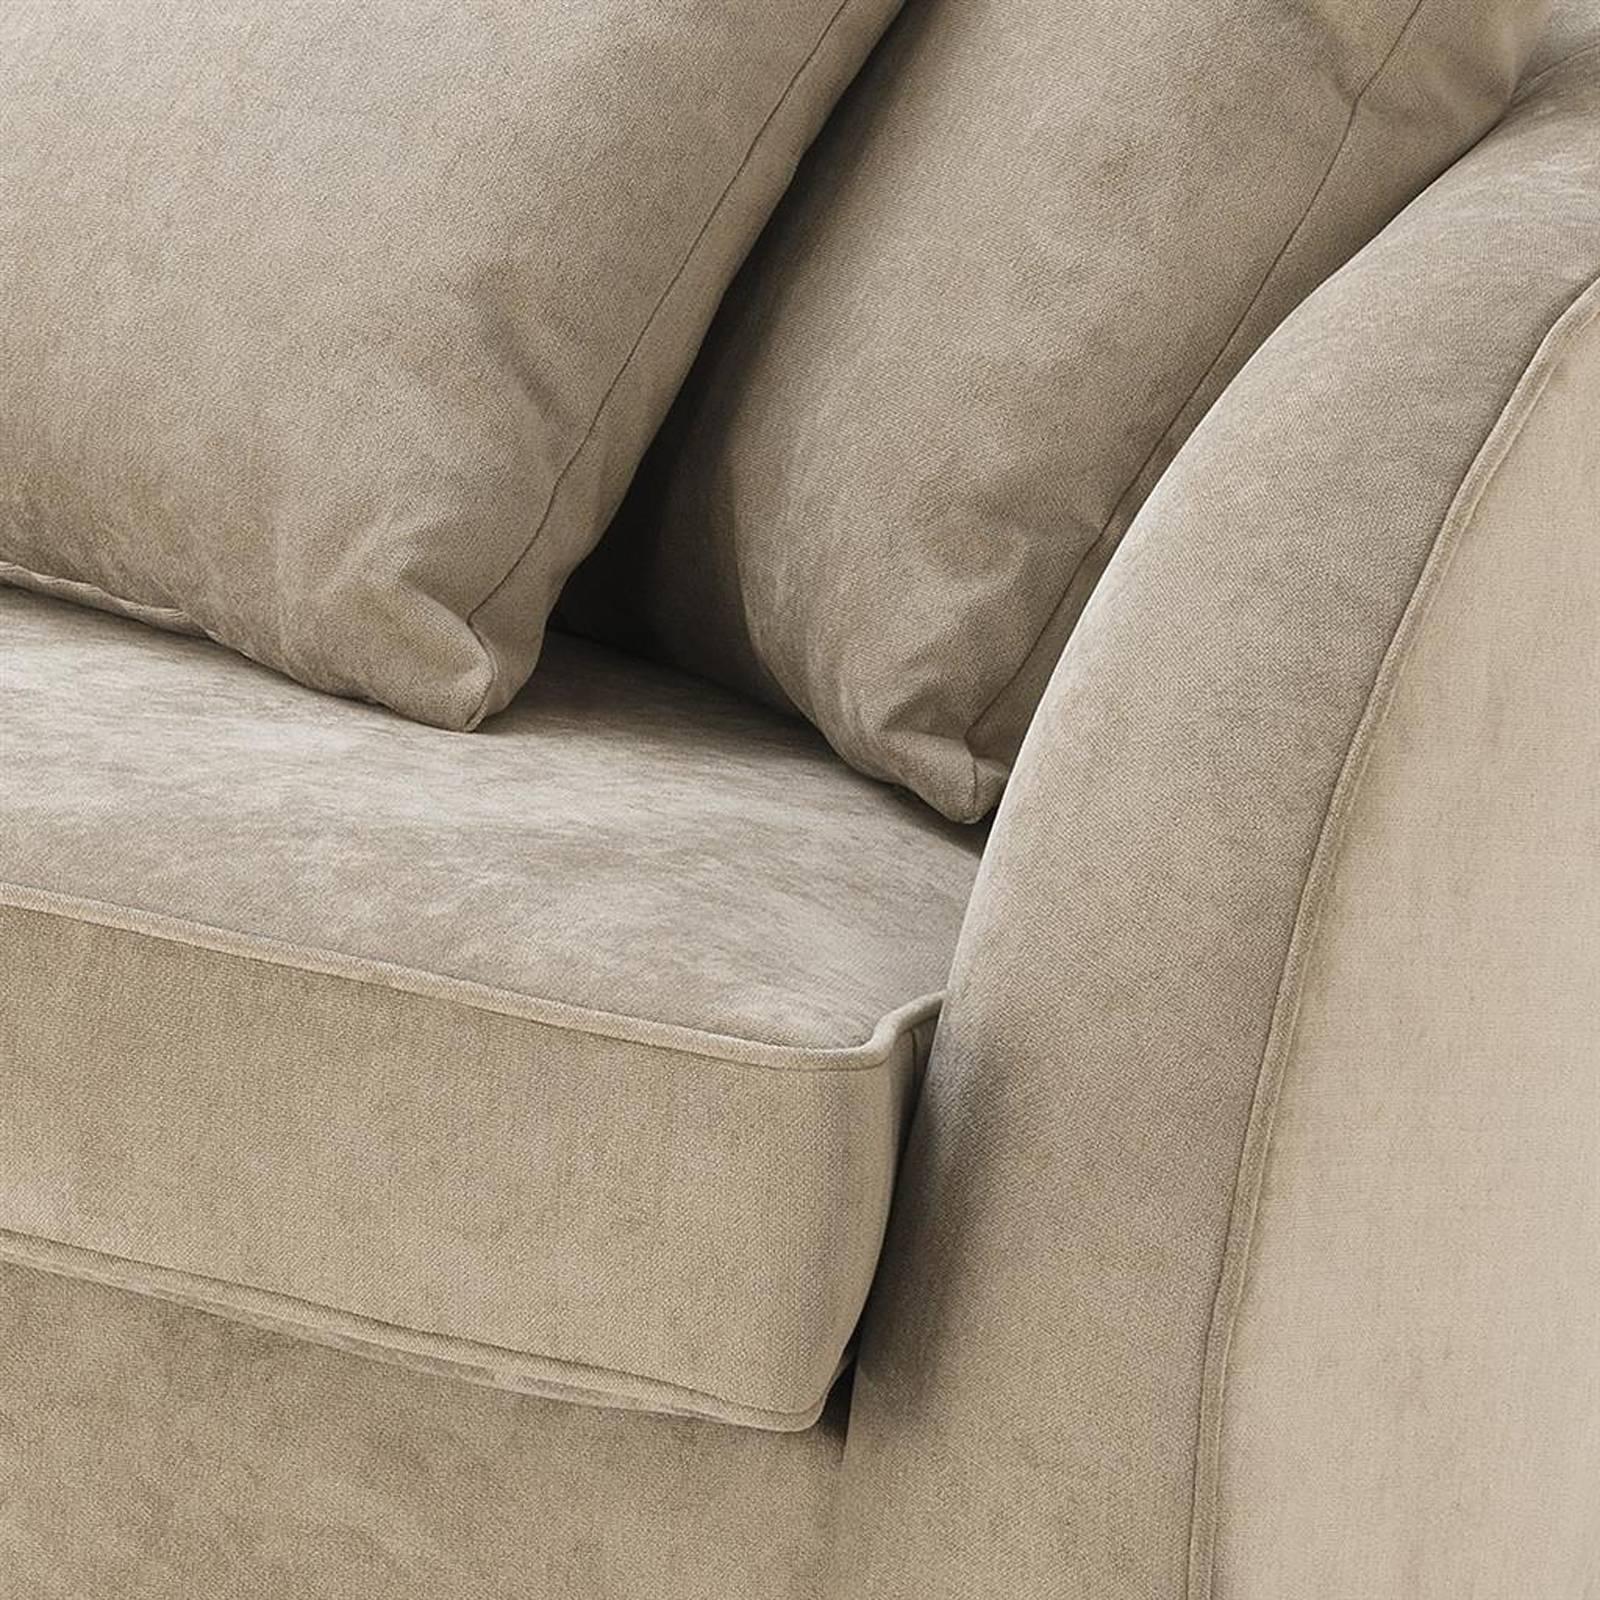 Hand-Crafted Miami Lounge Sofa with Greige Velvet Fabric